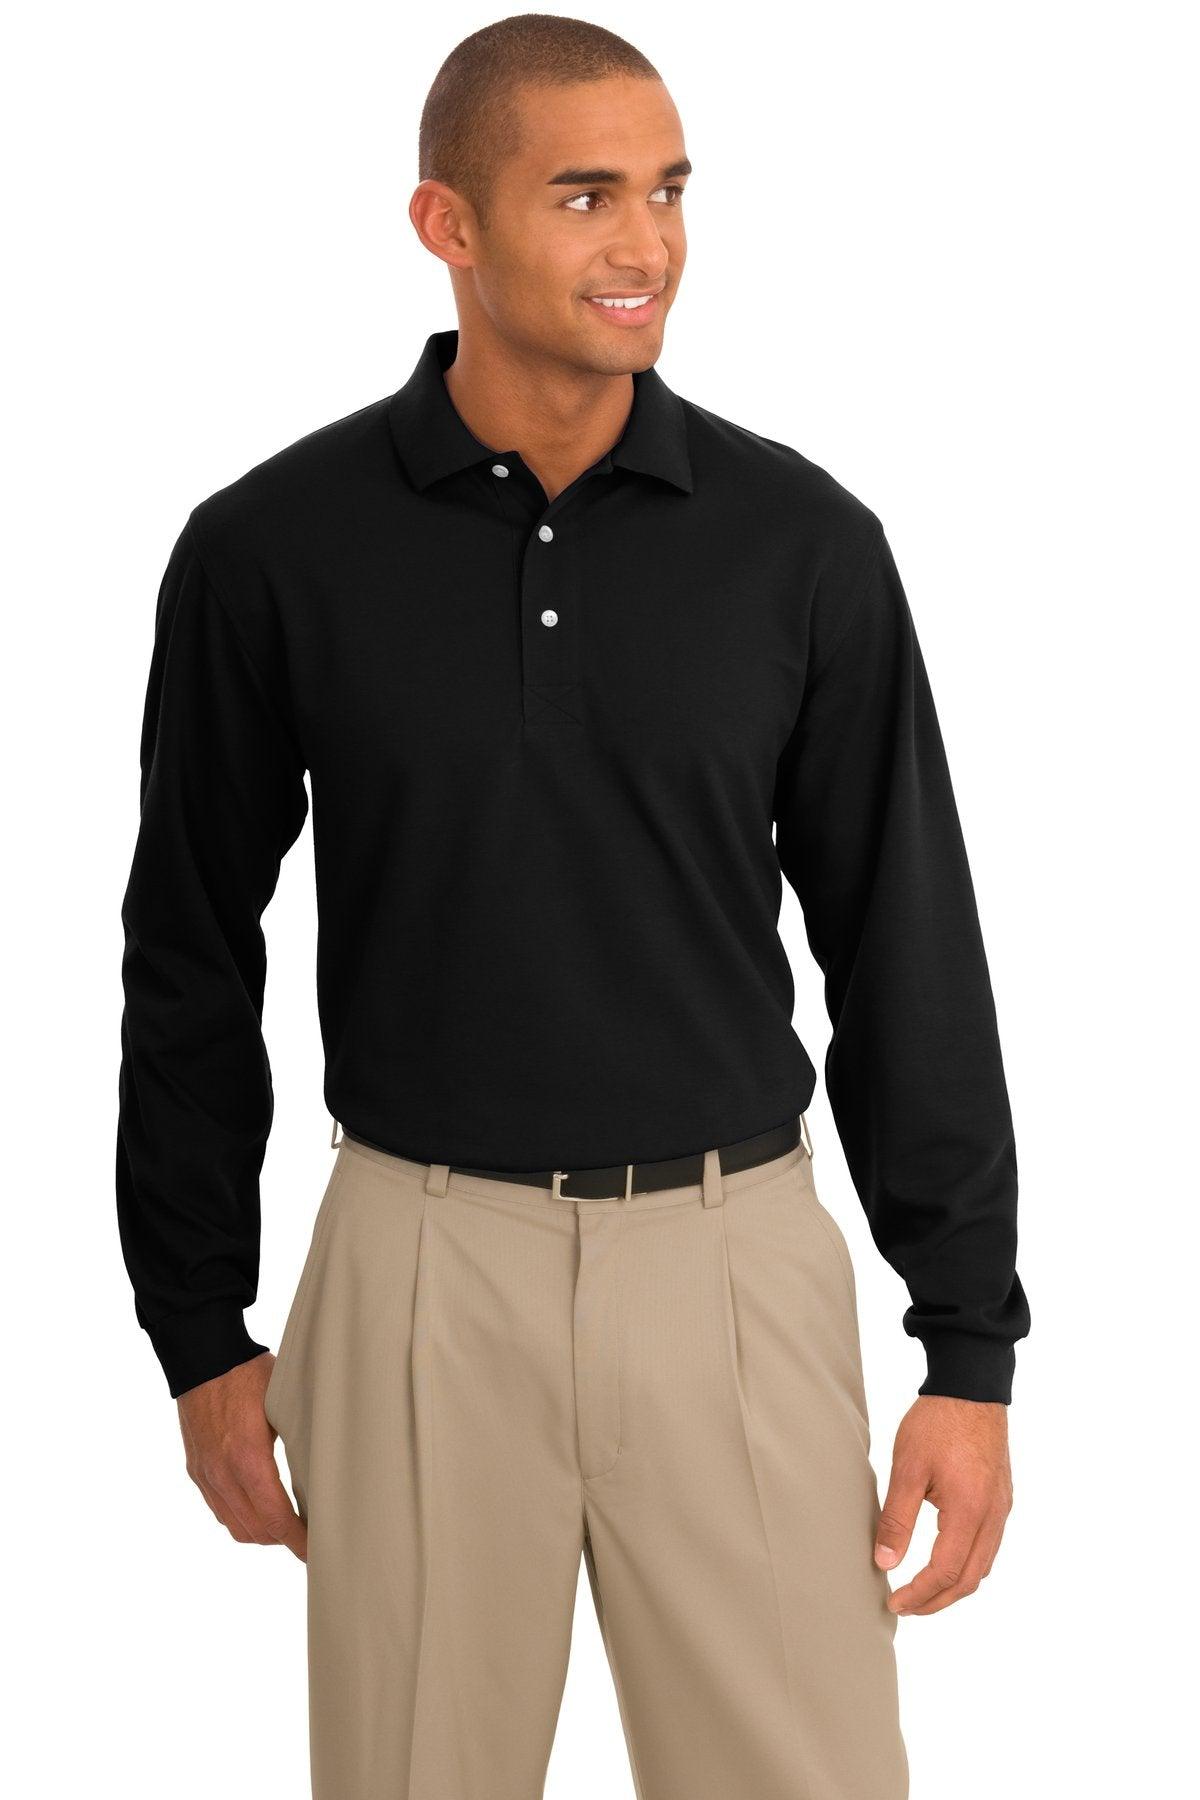 Port Authority Rapid Dry Long Sleeve Polo. K455LS - Dresses Max